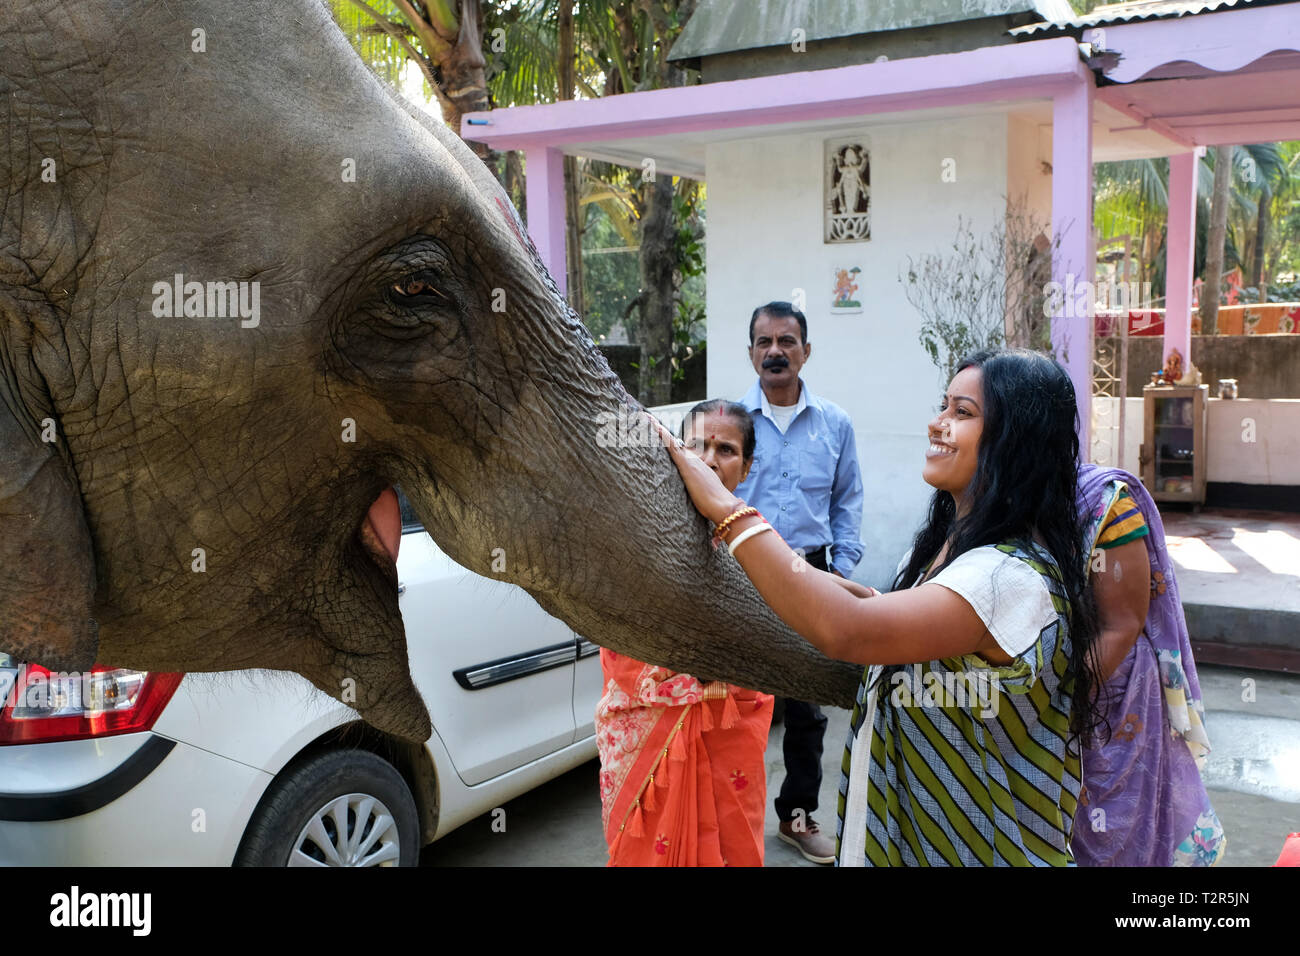 Elephant is worshiped by a hindu family at Tezpur, Assam state, India   ---   Elefant wird verehrt, Hindu-Familie bei Tezpur, Bundesstaat Assam, Indien Stock Photo